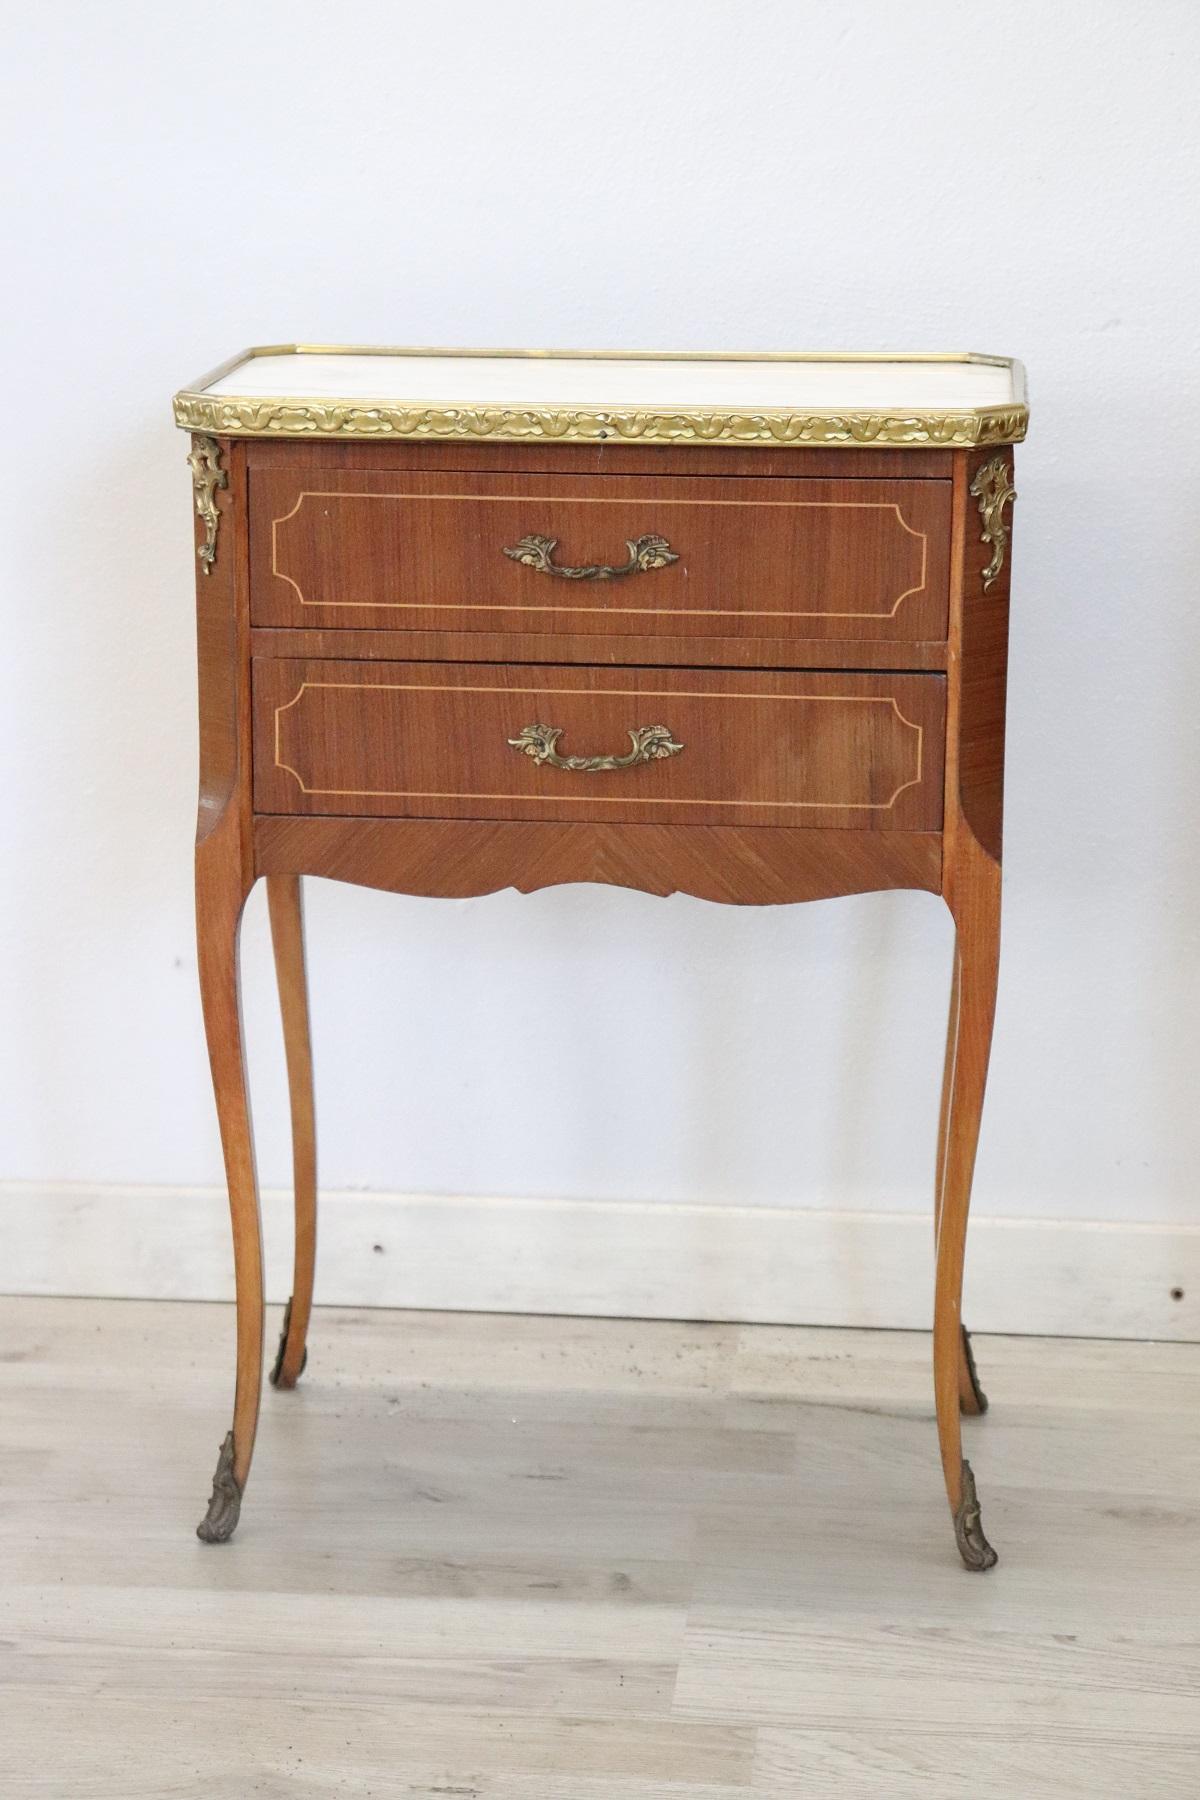 Louis XV style furniture richly adorned with gilded and chiselled bronze. The wood has a delicate geometric inlay. The top is in precious white marble with light grey and pink veins. A pair of really elegant bedside tables, ideal in the bedroom but